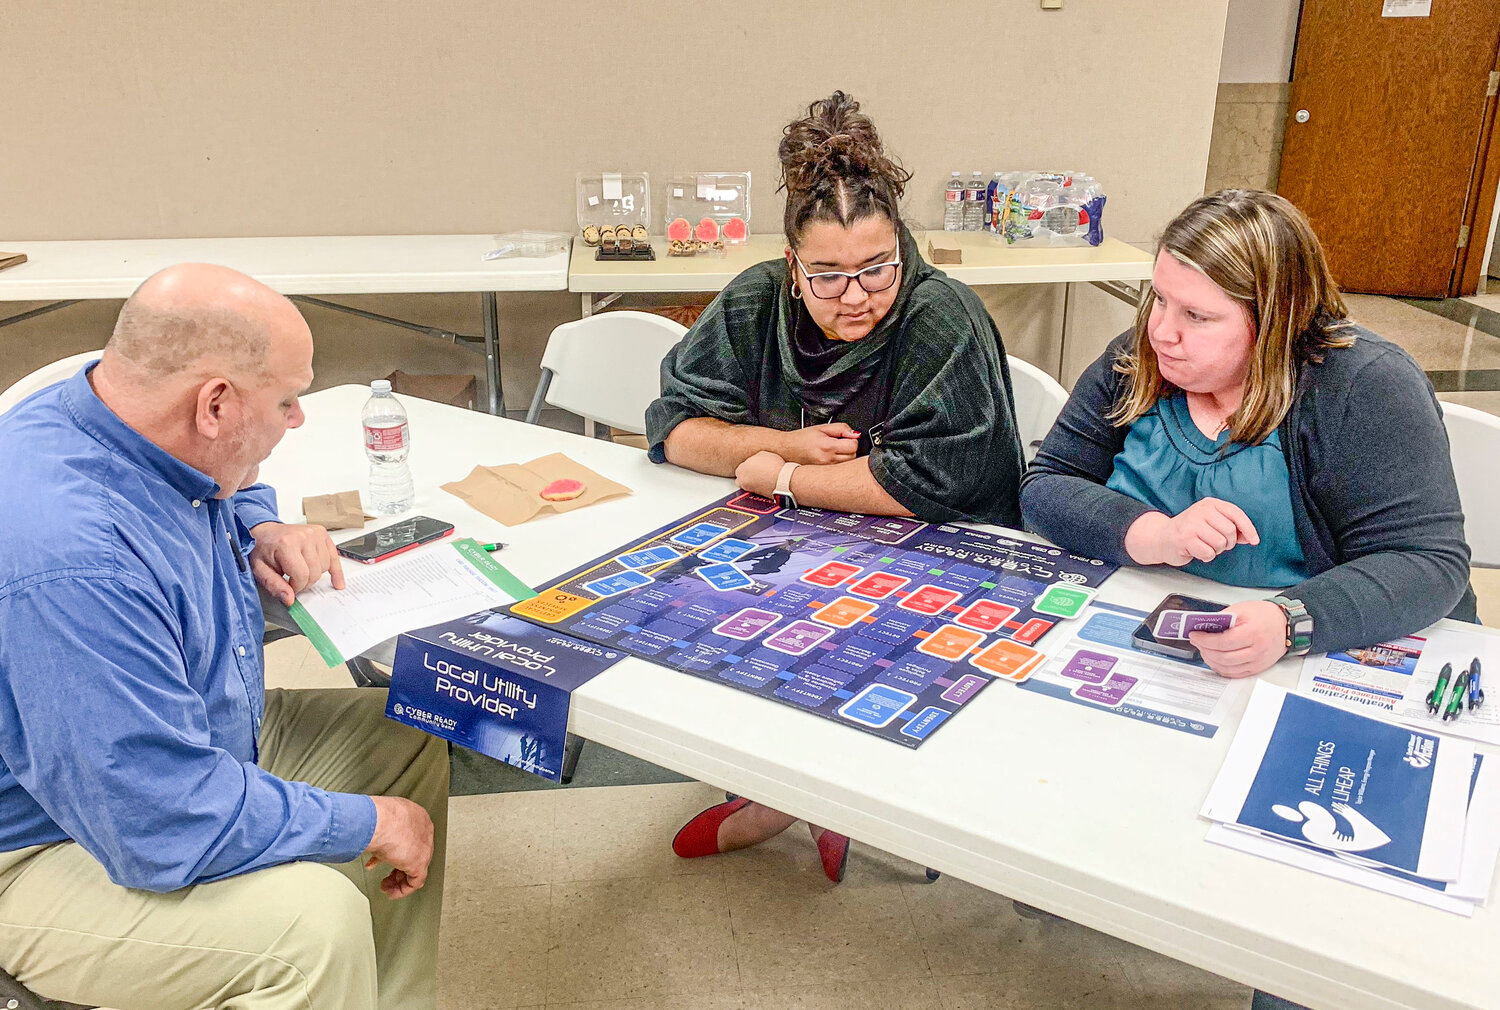 From left, Tad Dobyns and Taylor Williams with Central Missouri Community Action and Audrain County Collector Amy LeCount were in a group together playing a cyber security game. The game was set up by Audrain County Emergency Management Director Carl Donaldson (not pictured).